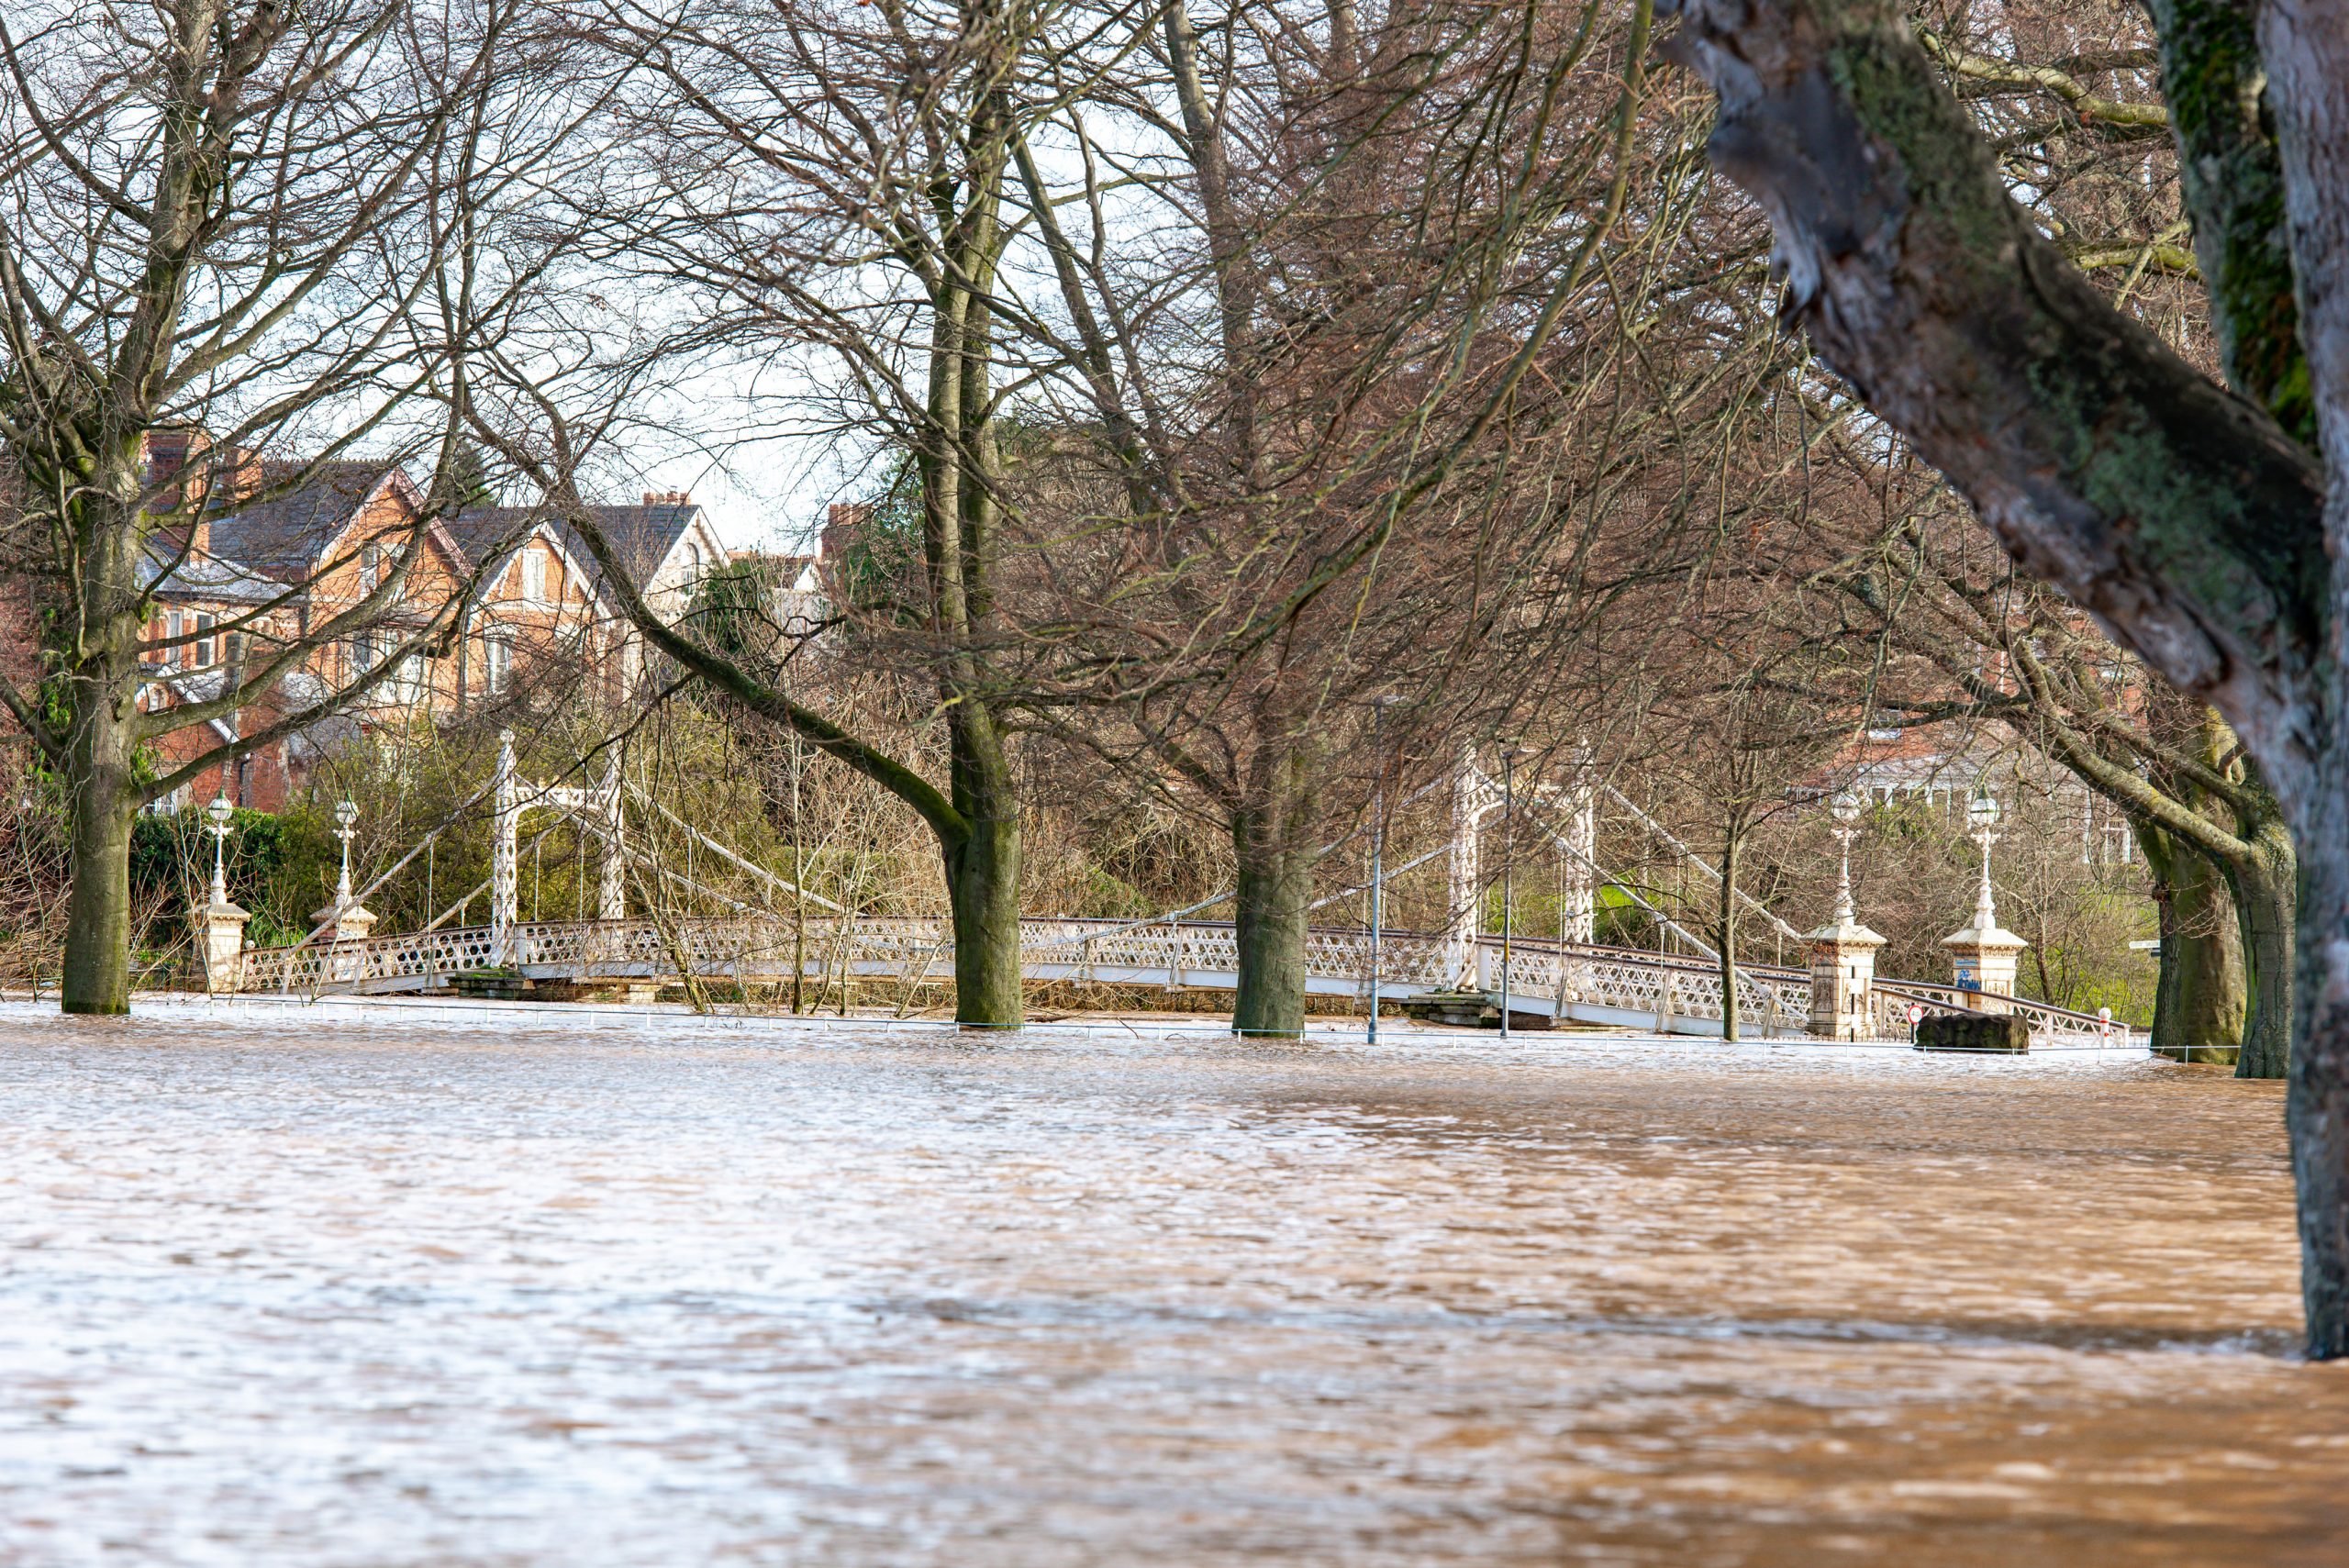 NEWS | Flood Alerts issued after more heavy rain